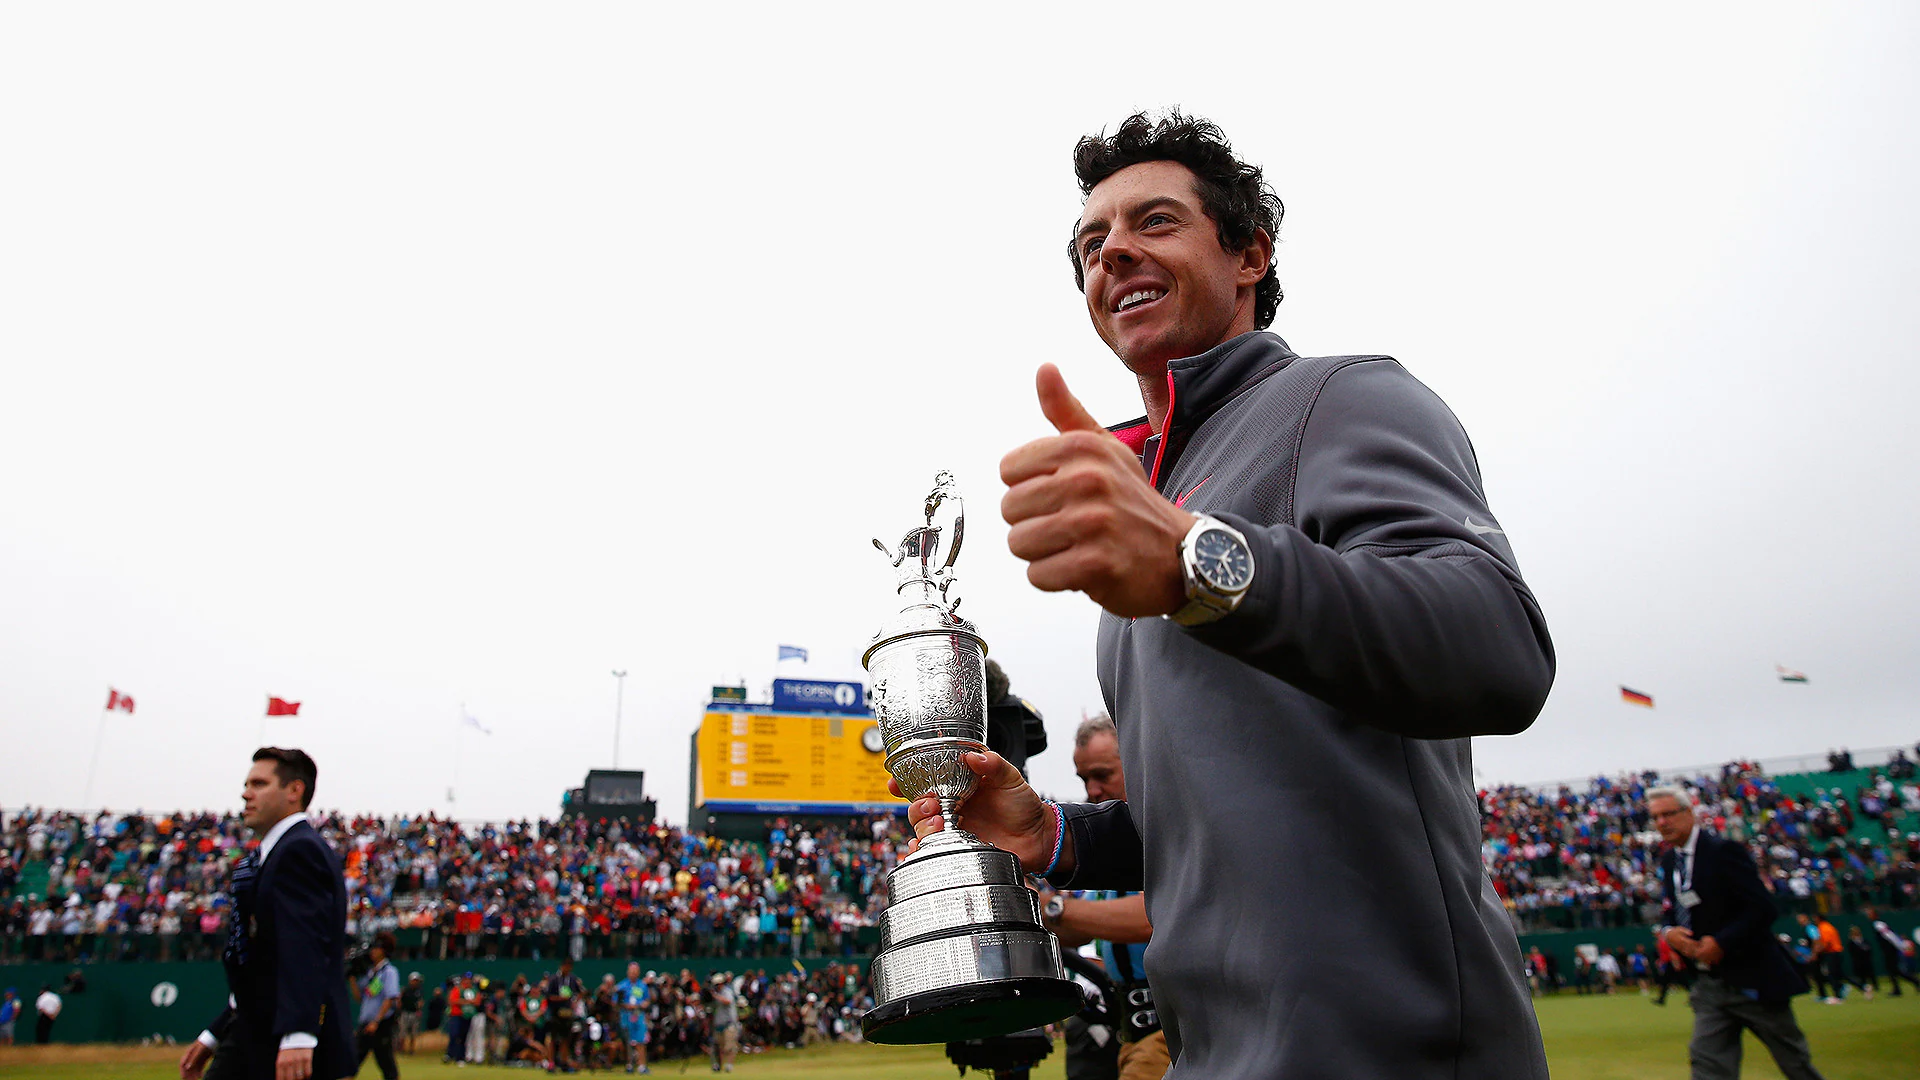 As Rory McIlroy turns 32, here’s 32 moments – the good, the bad, the other – from his career